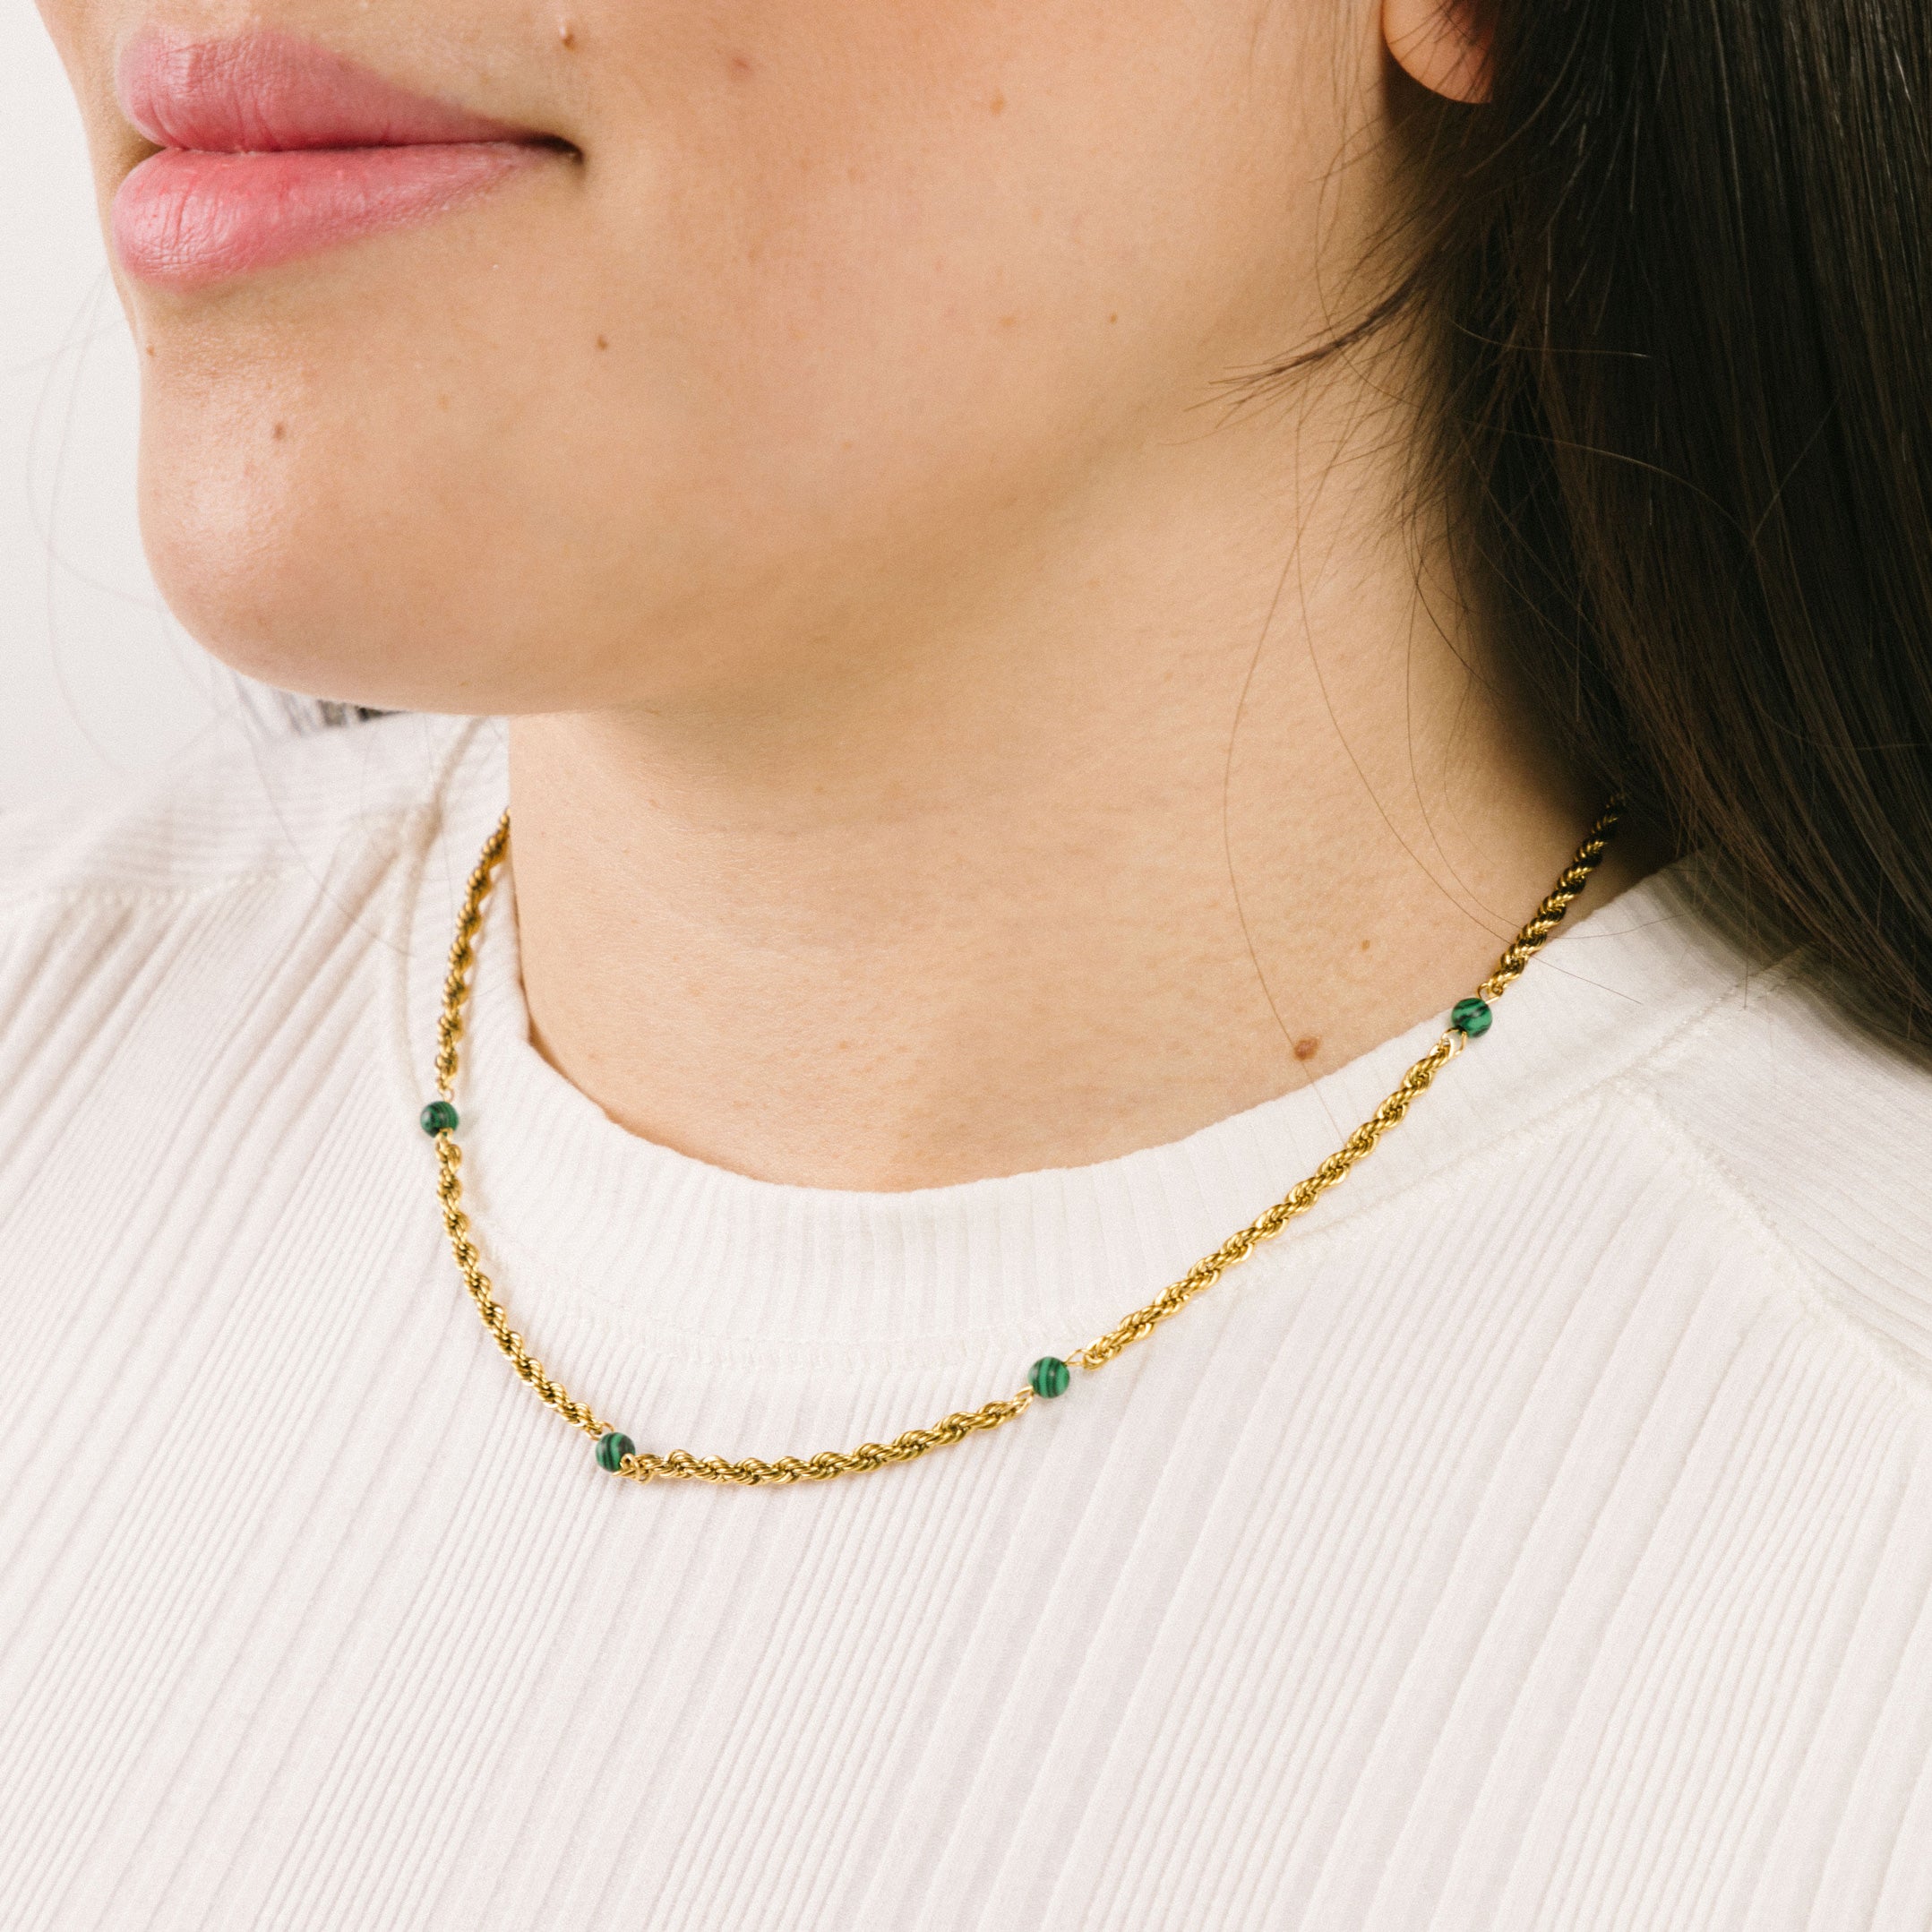 A model wearing the Cyrus Chain Necklace features adjustable sizing and is constructed with 18K gold-plated stainless steel and natural malachite stone for a durable, non-tarnish, and waterproof design. Please note that this item is one necklace.